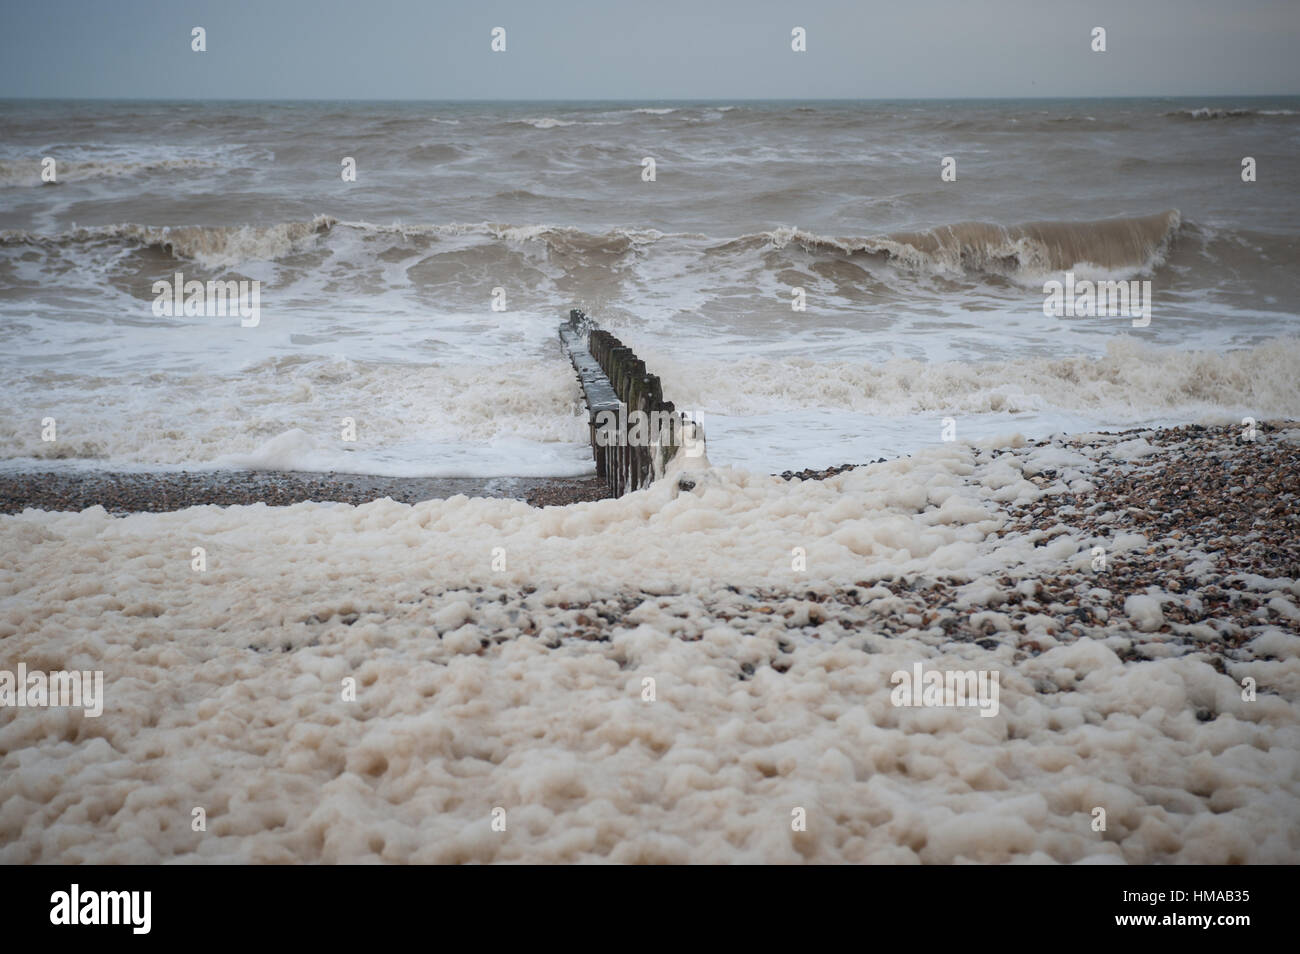 Large amounts of sea foam, caused by a recent storm, covers the beach in Littlehampton, West Sussex, UK. The sea foam is created by the agitation of seawater, particularly when it contains high concentrations of dissolved organic matter. Stock Photo